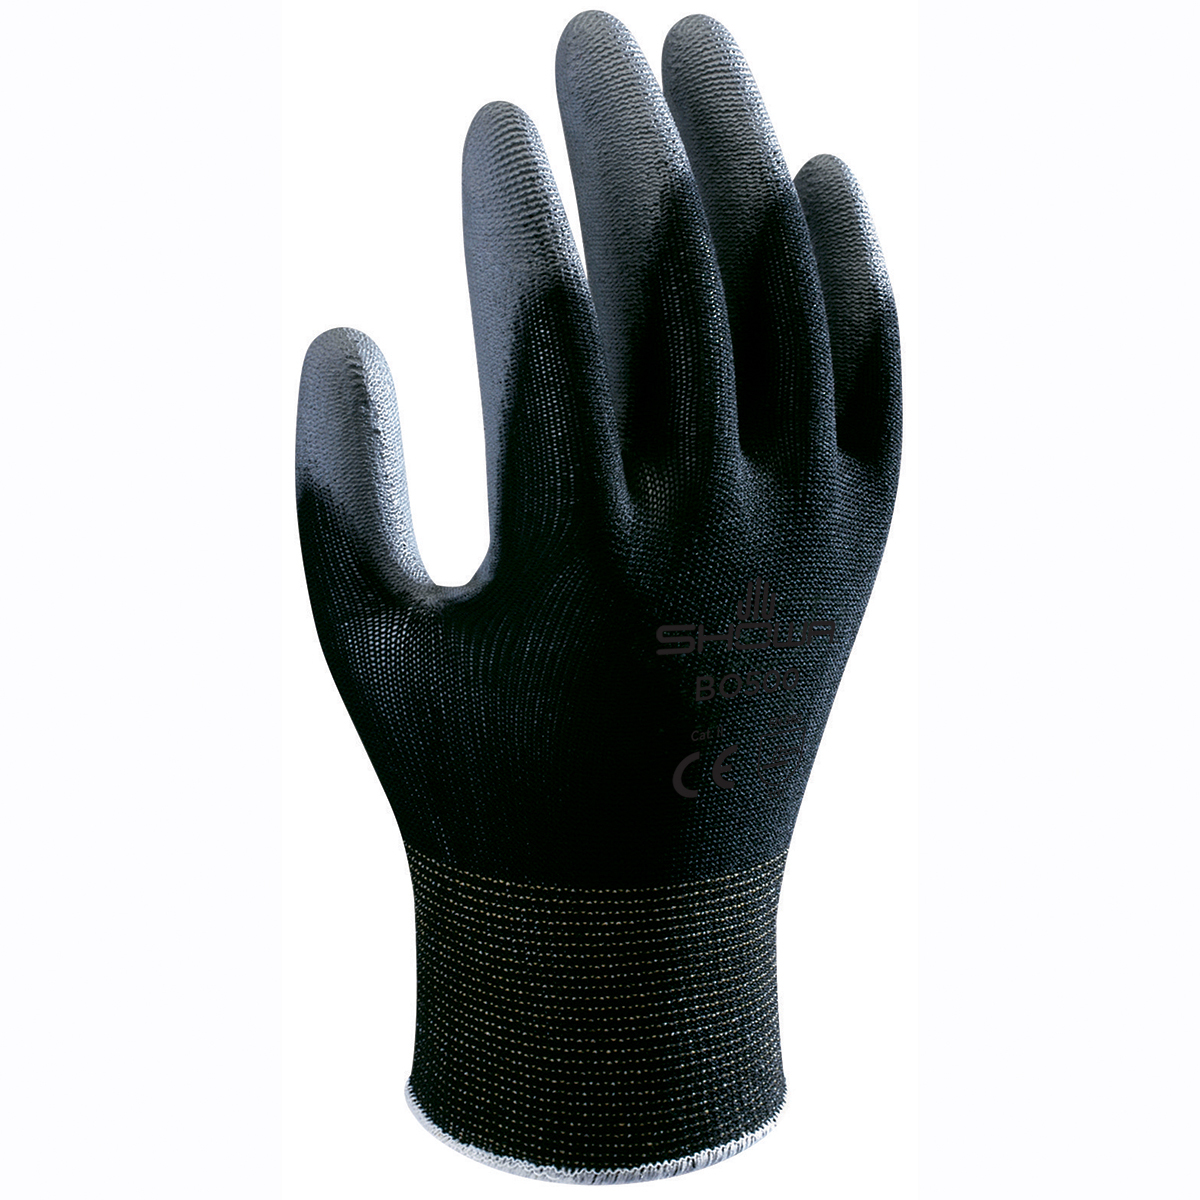 SHOWA® 13 Gauge Polyurethane Palm Coated Work Gloves With Nylon Knit Liner And Knit Wrist